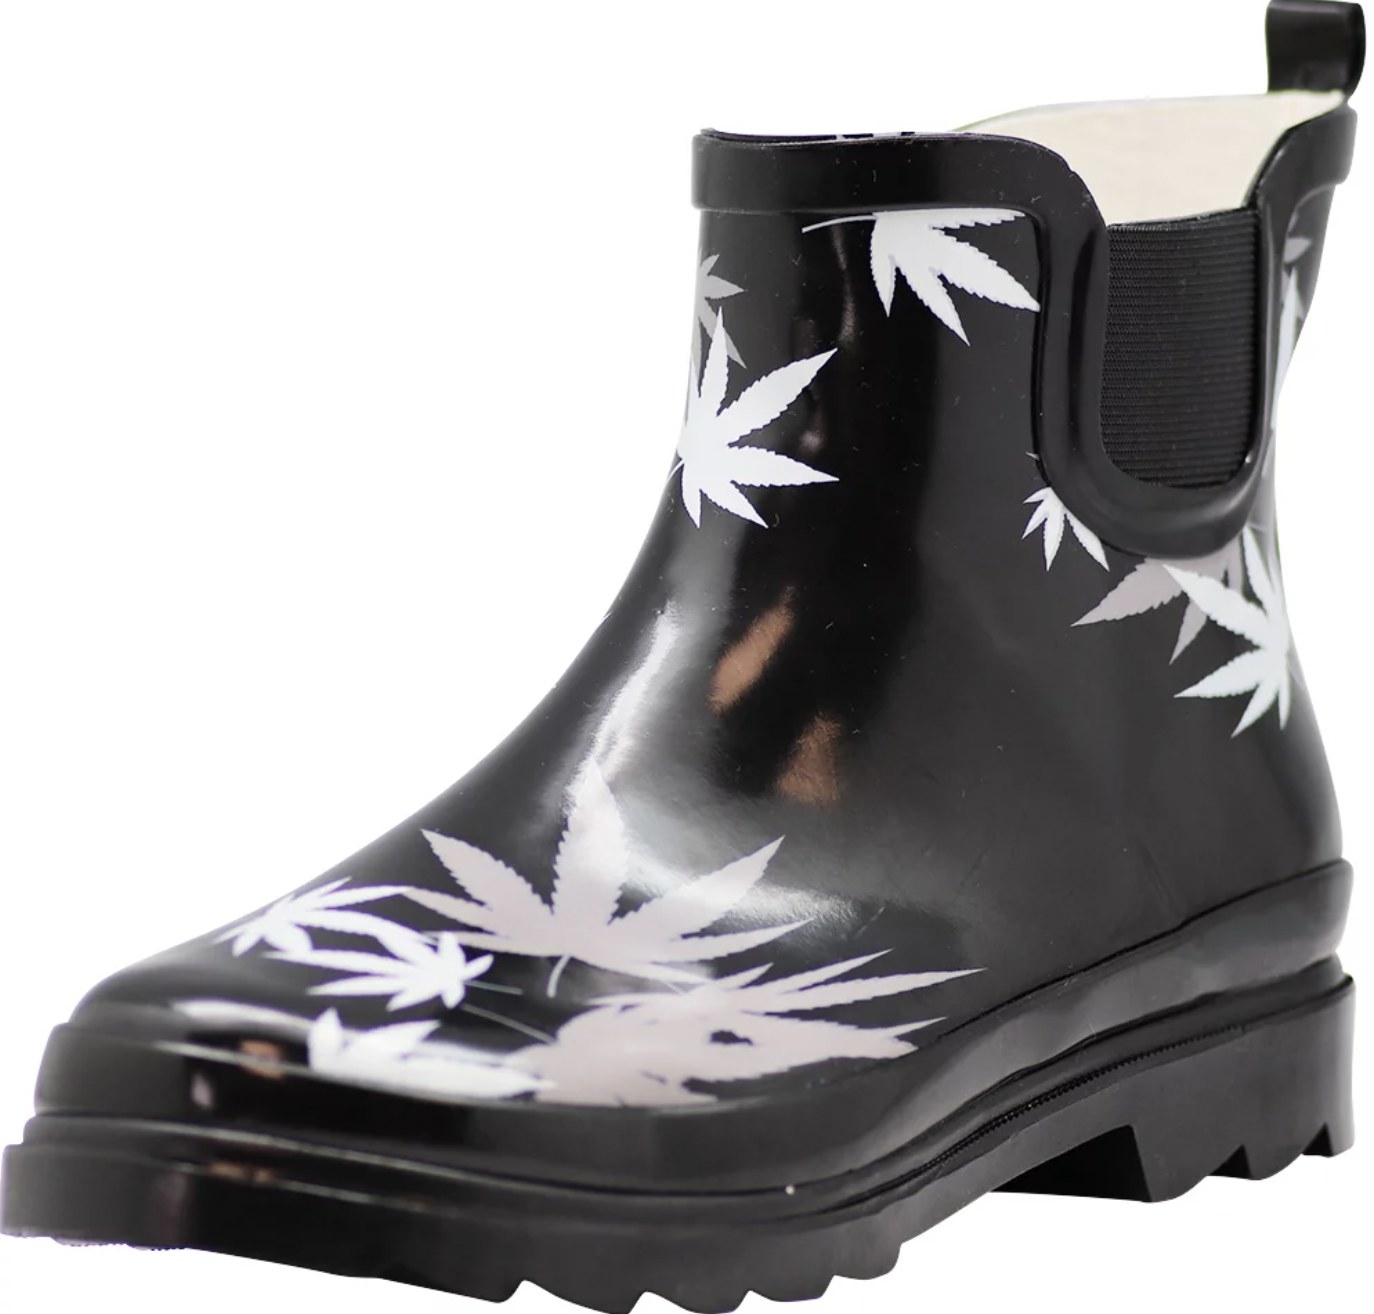 A black rain boot with white weed leaves on it